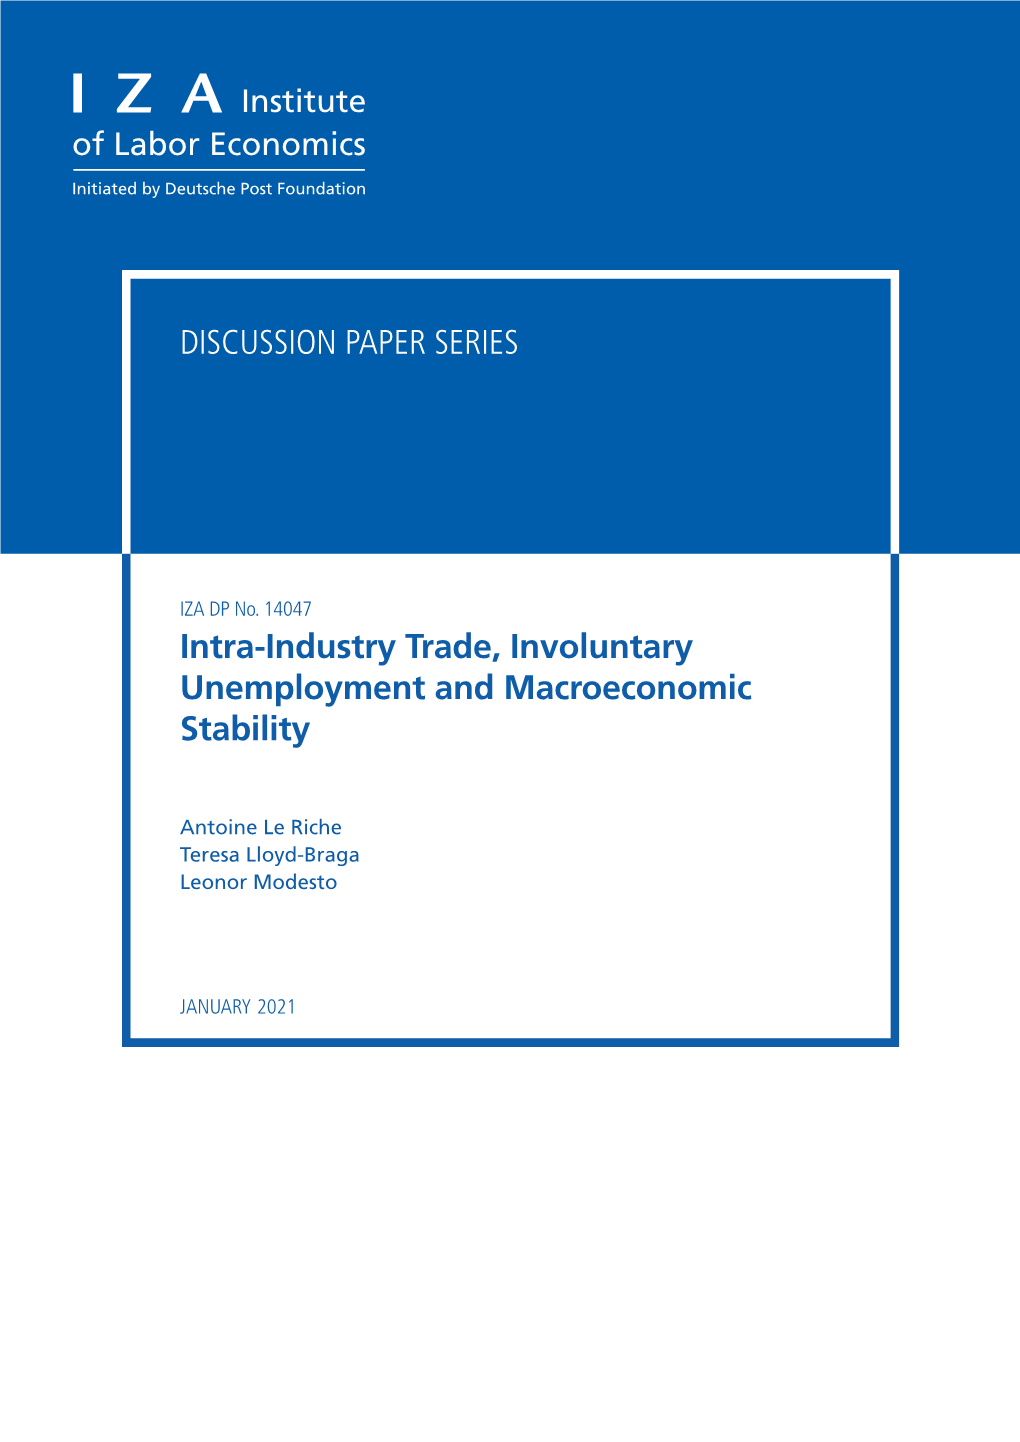 Intra-Industry Trade, Involuntary Unemployment and Macroeconomic Stability